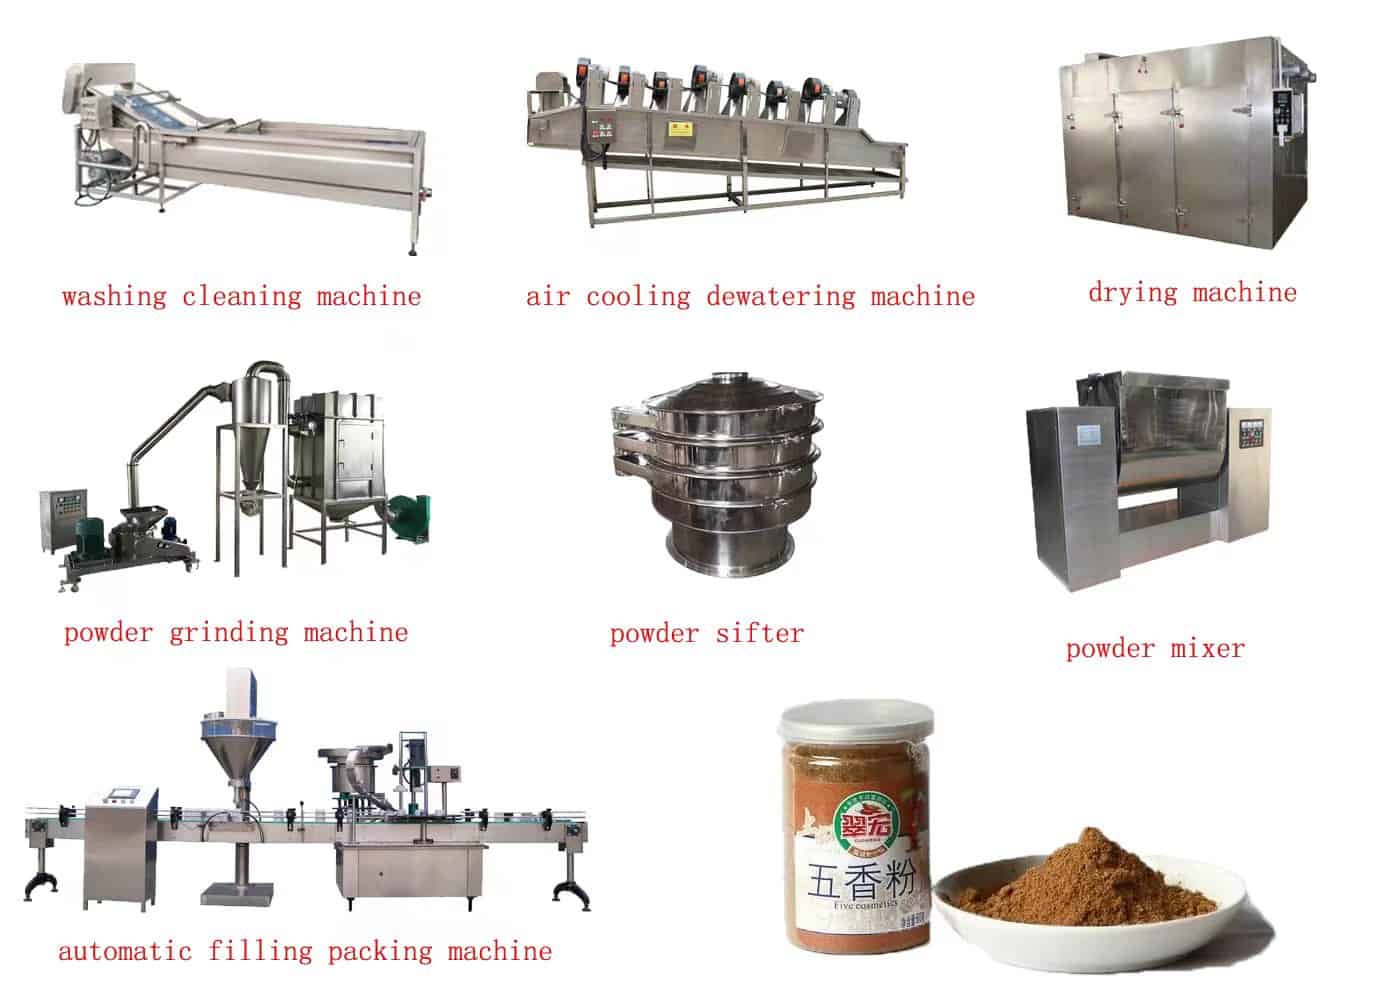 spice processing equipment in spice factory